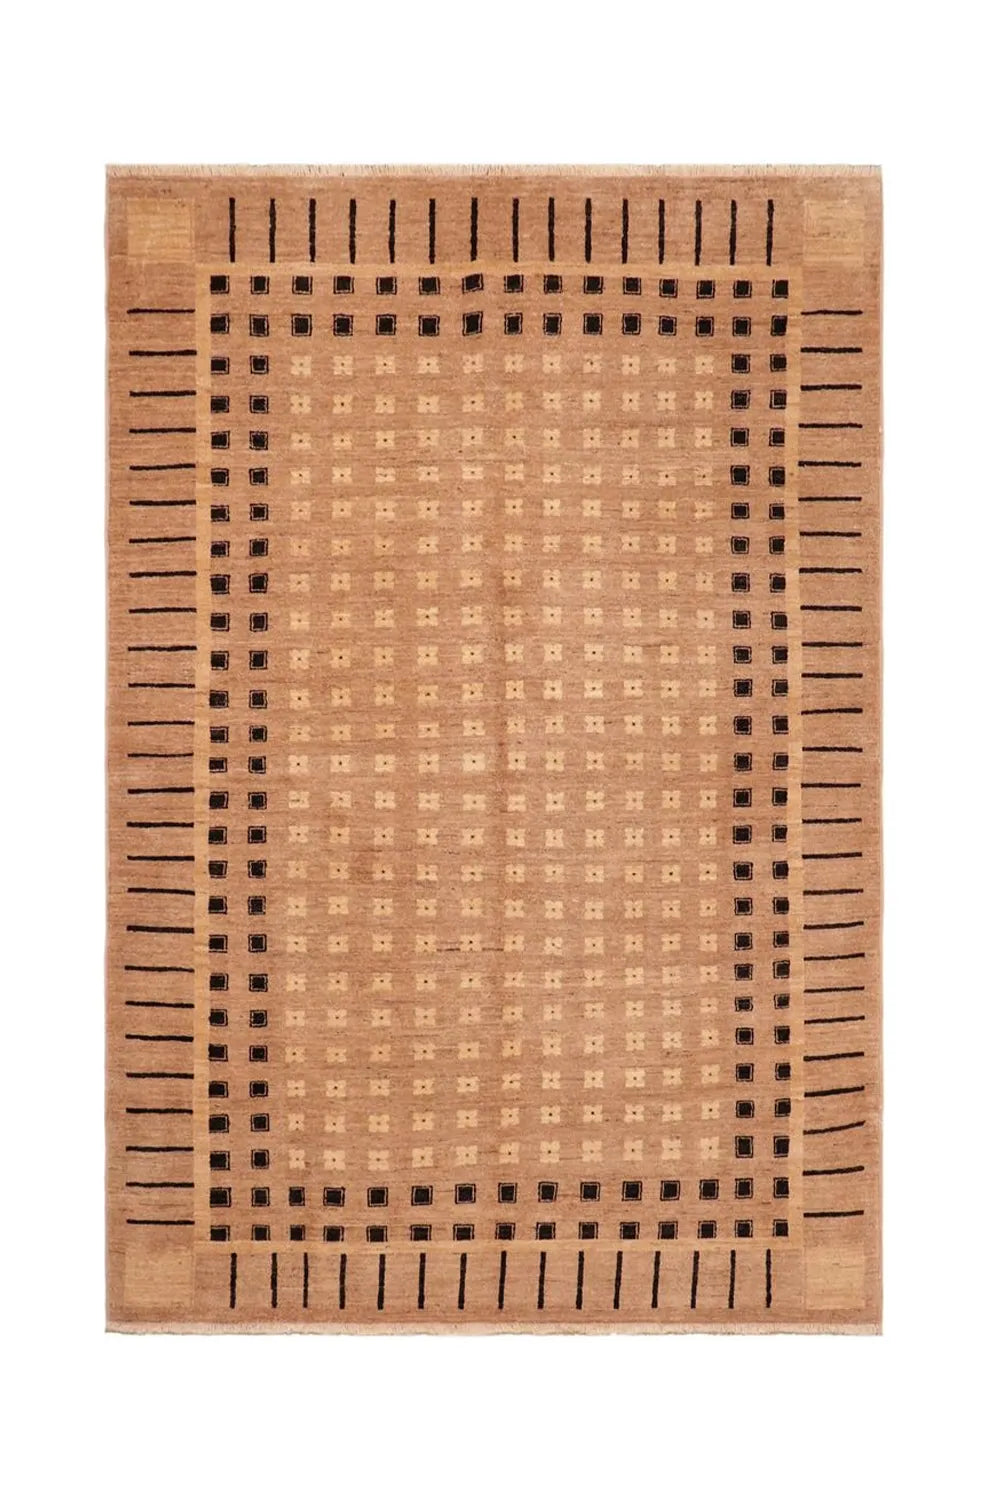 Mid Century Modern Turkish rug with a striking pattern in tan, black, and beige.